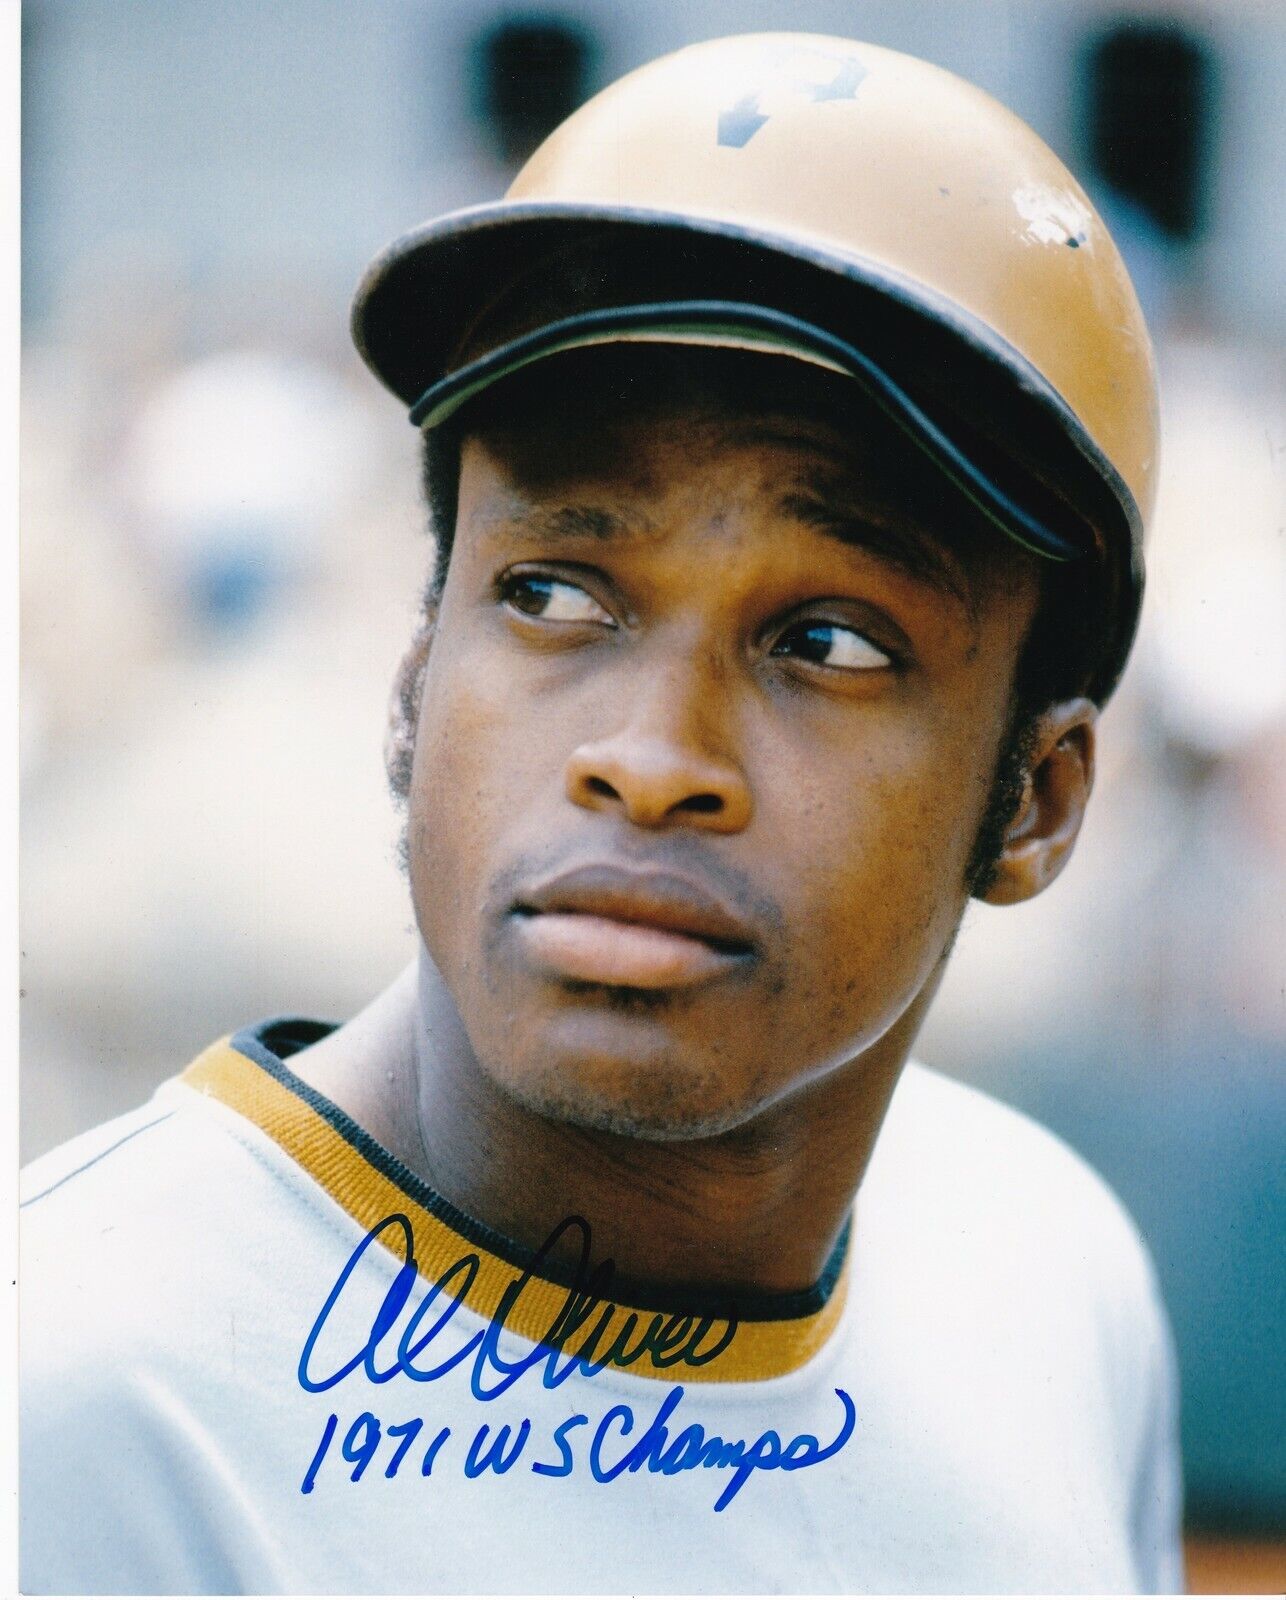 AL OLIVER PITTSBURGH PIRATES 1971 WS CHAMPS ACTION SIGNED 8x10